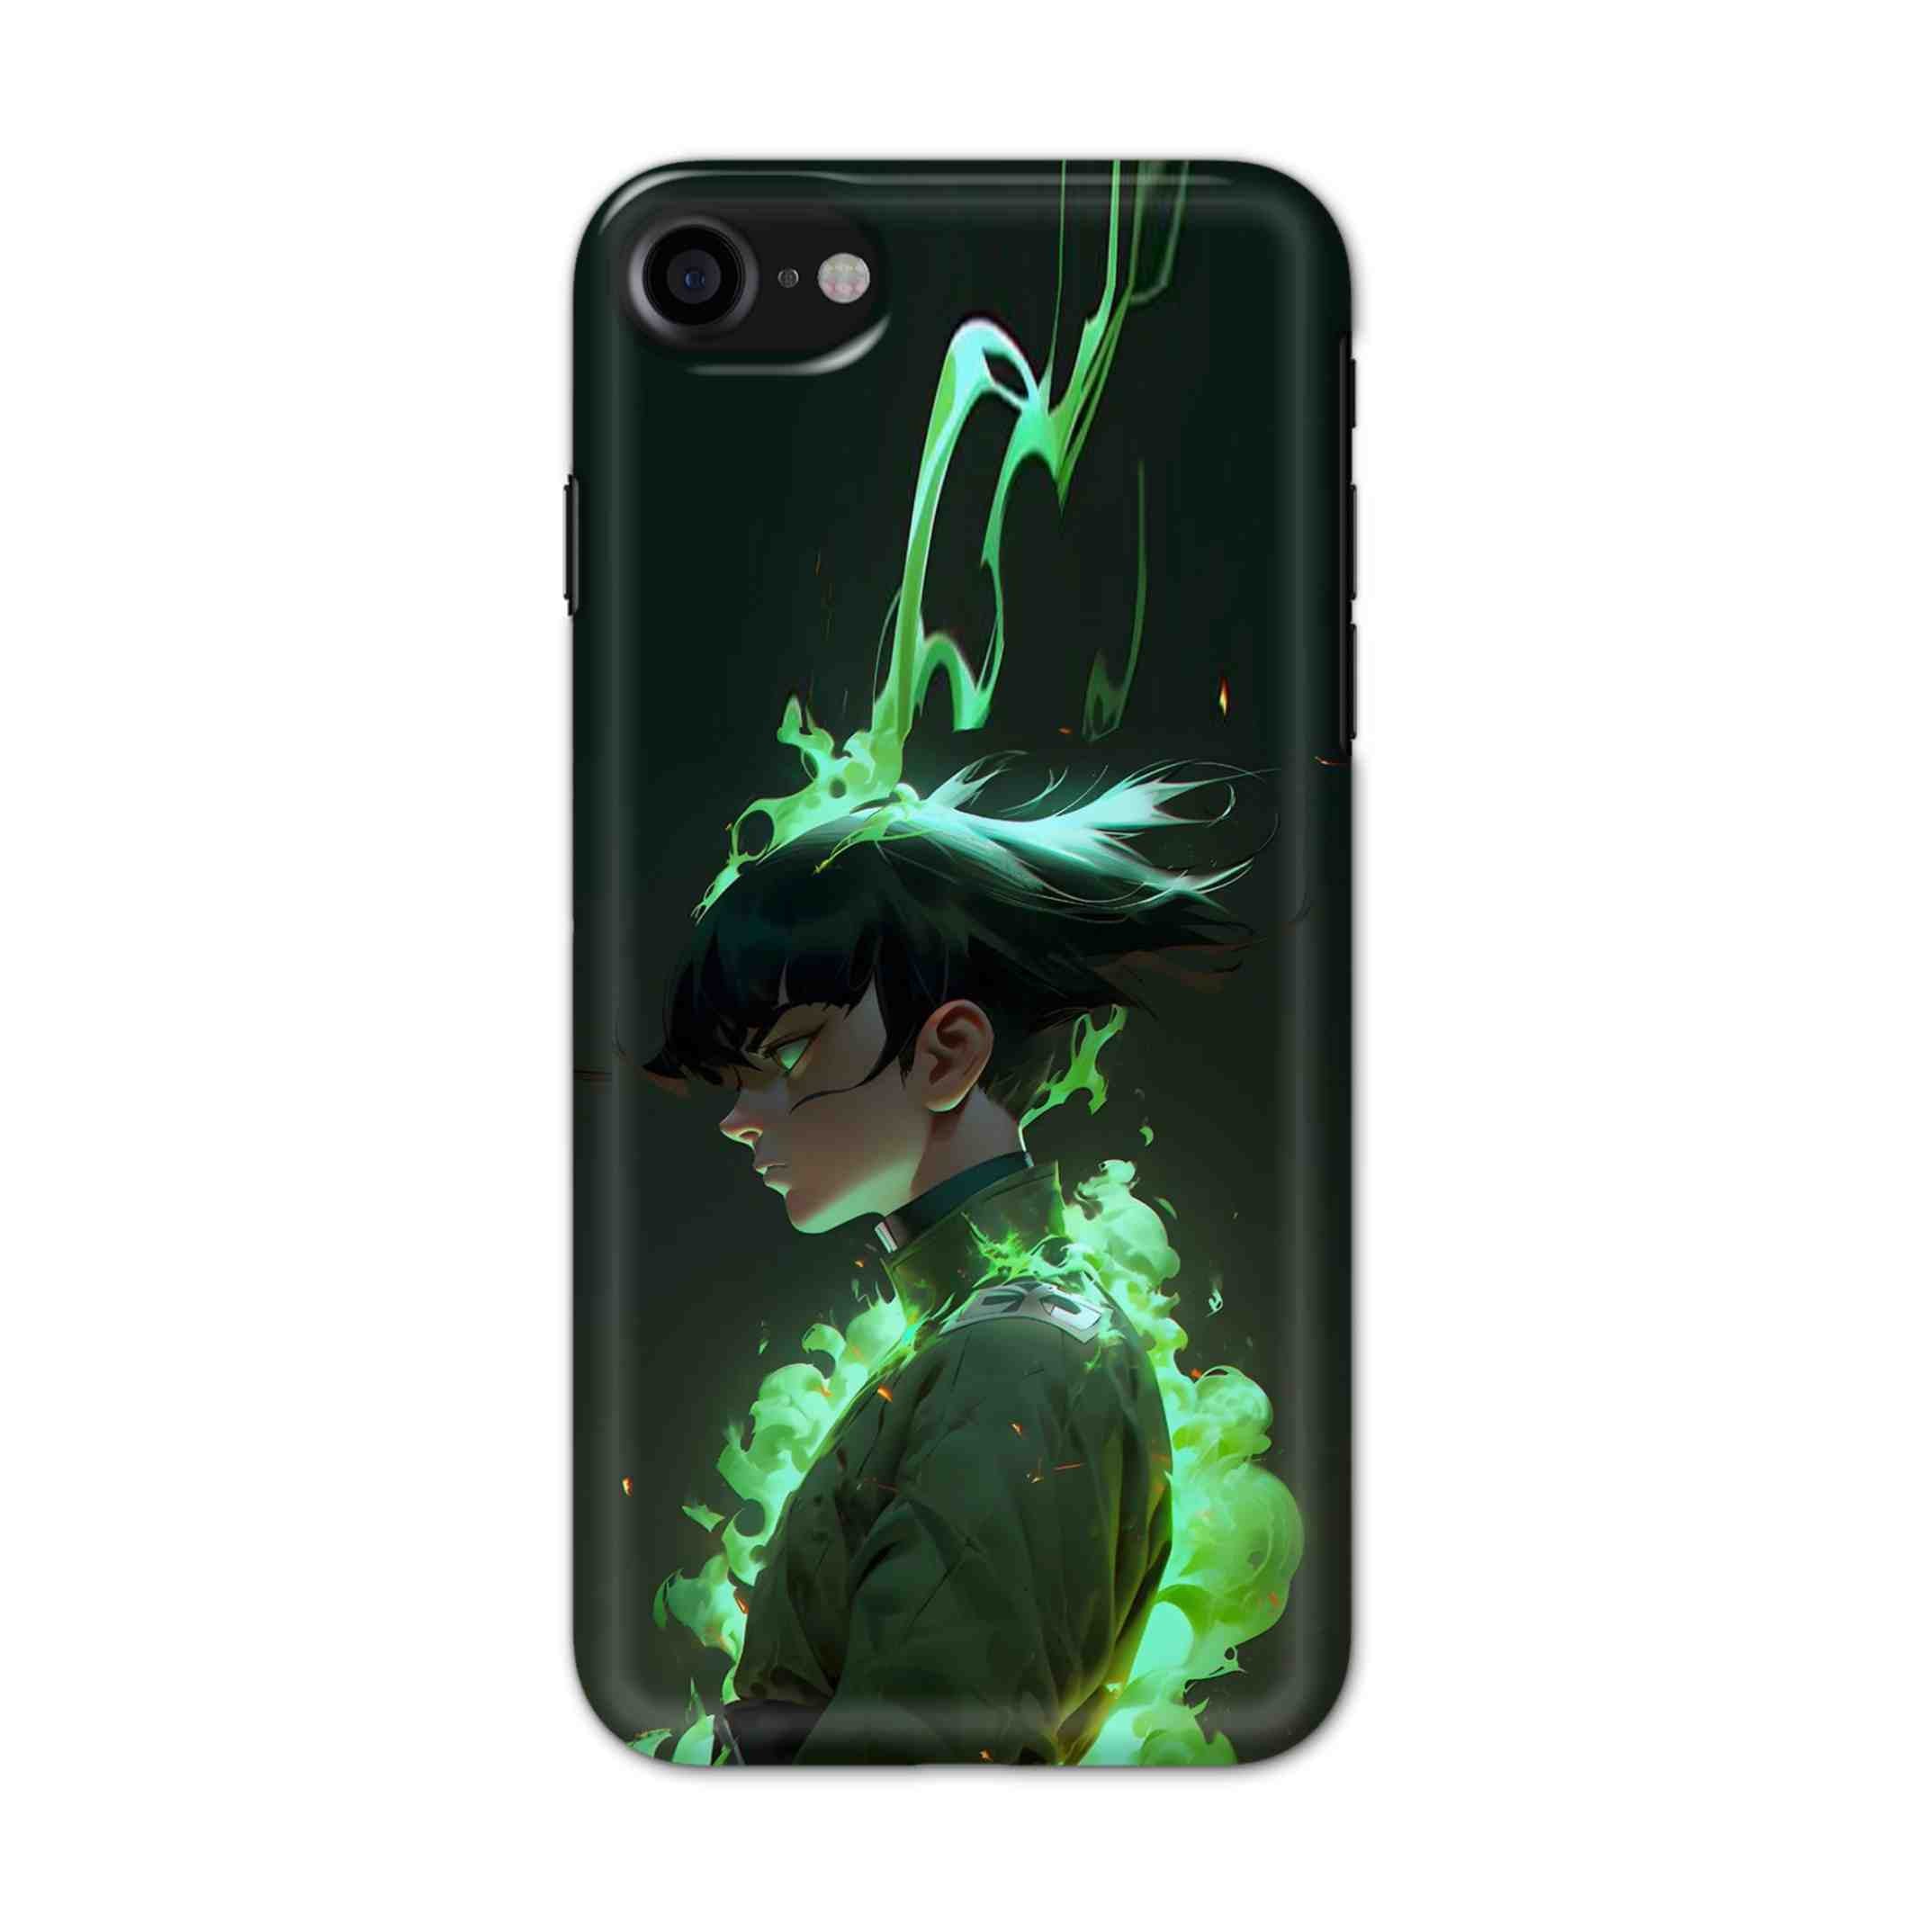 Buy Akira Hard Back Mobile Phone Case/Cover For iPhone 7 / 8 Online